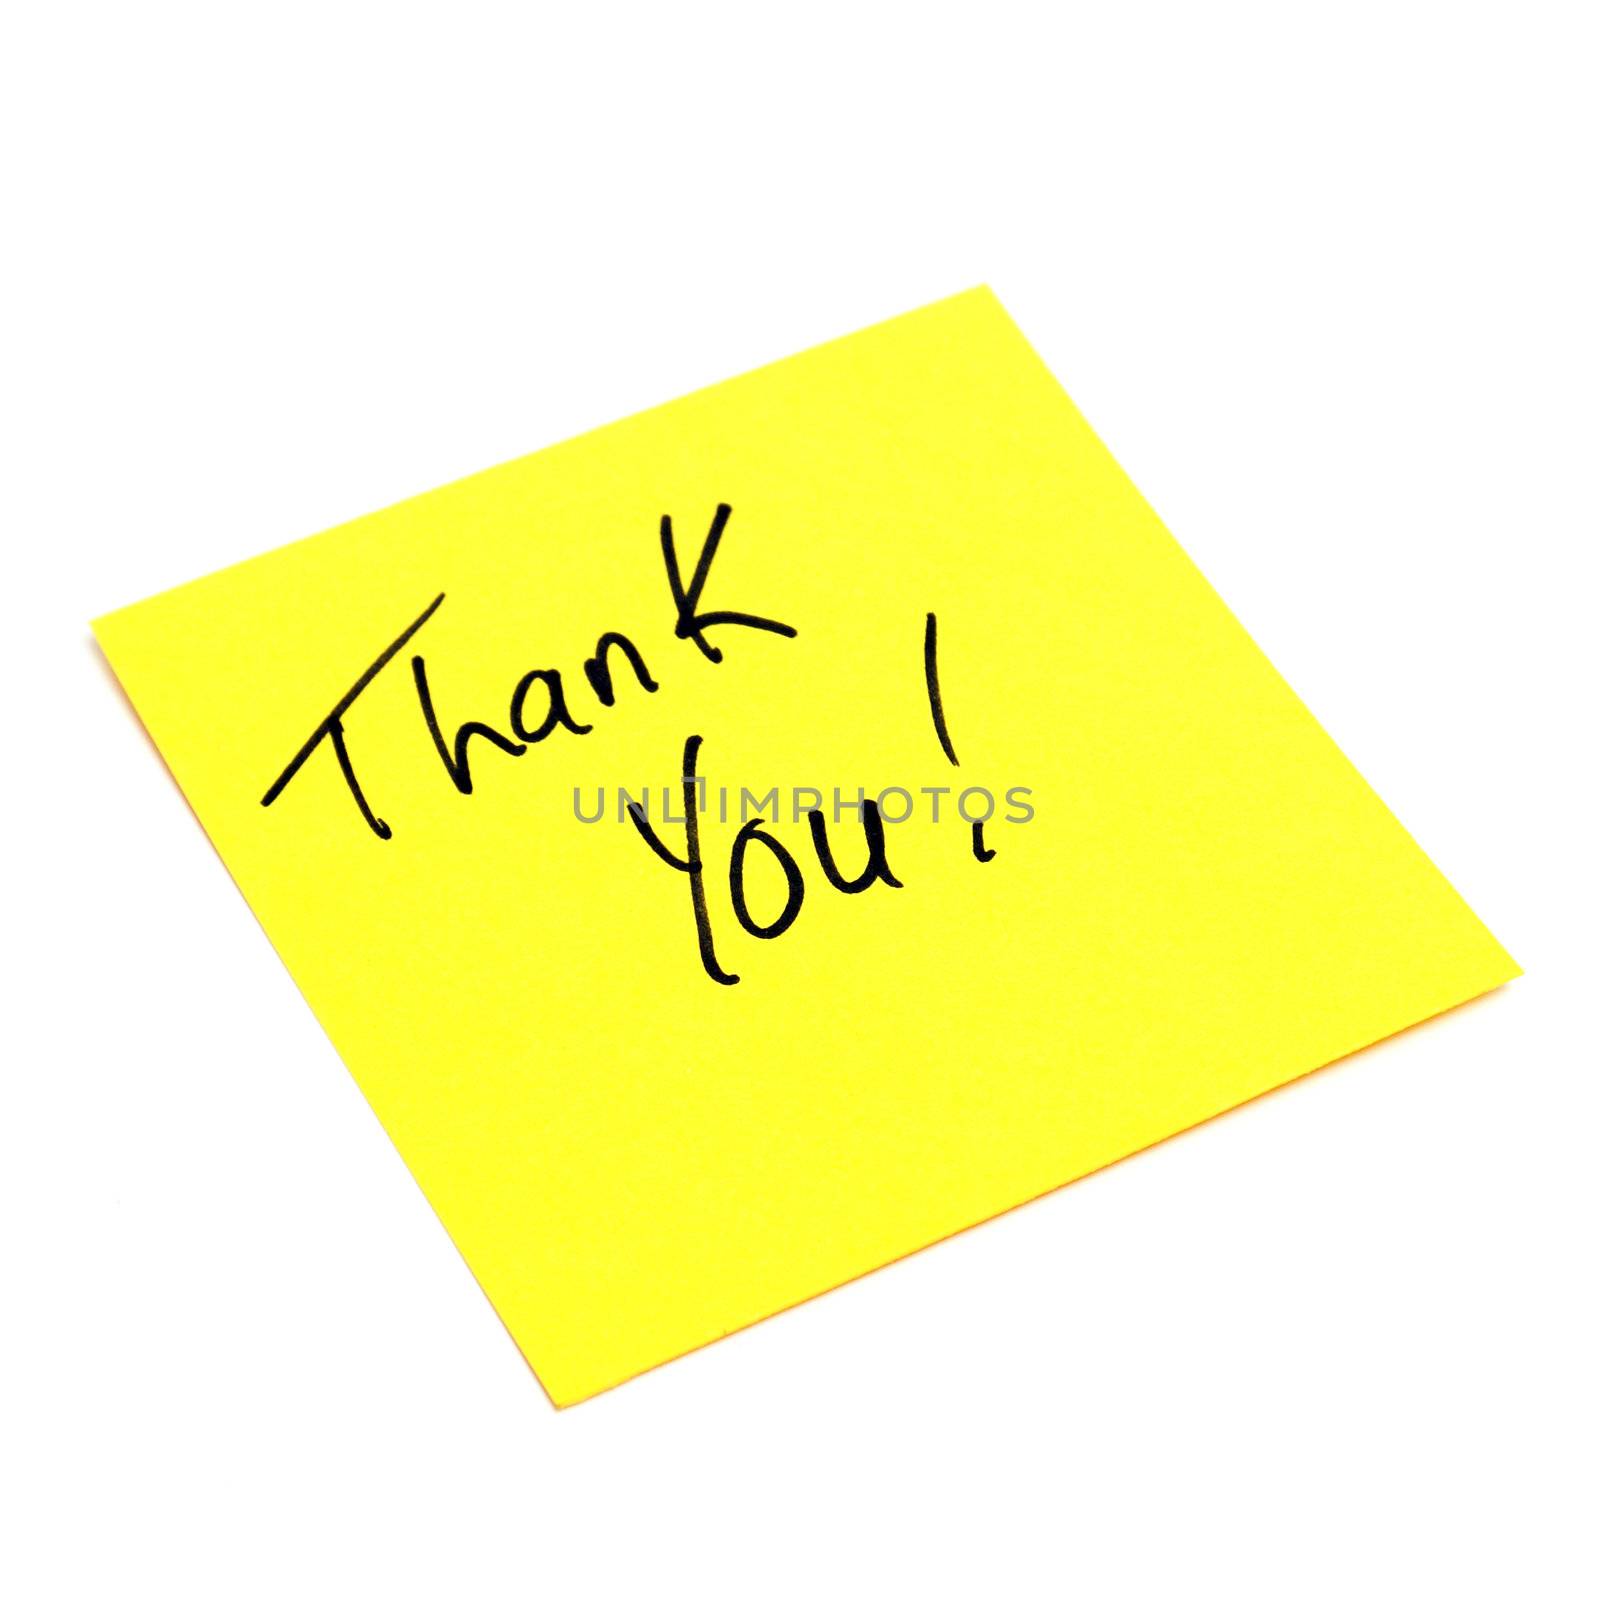 A yellow sticky note is isolated on white with a handwritten note giving thanks where it is due.